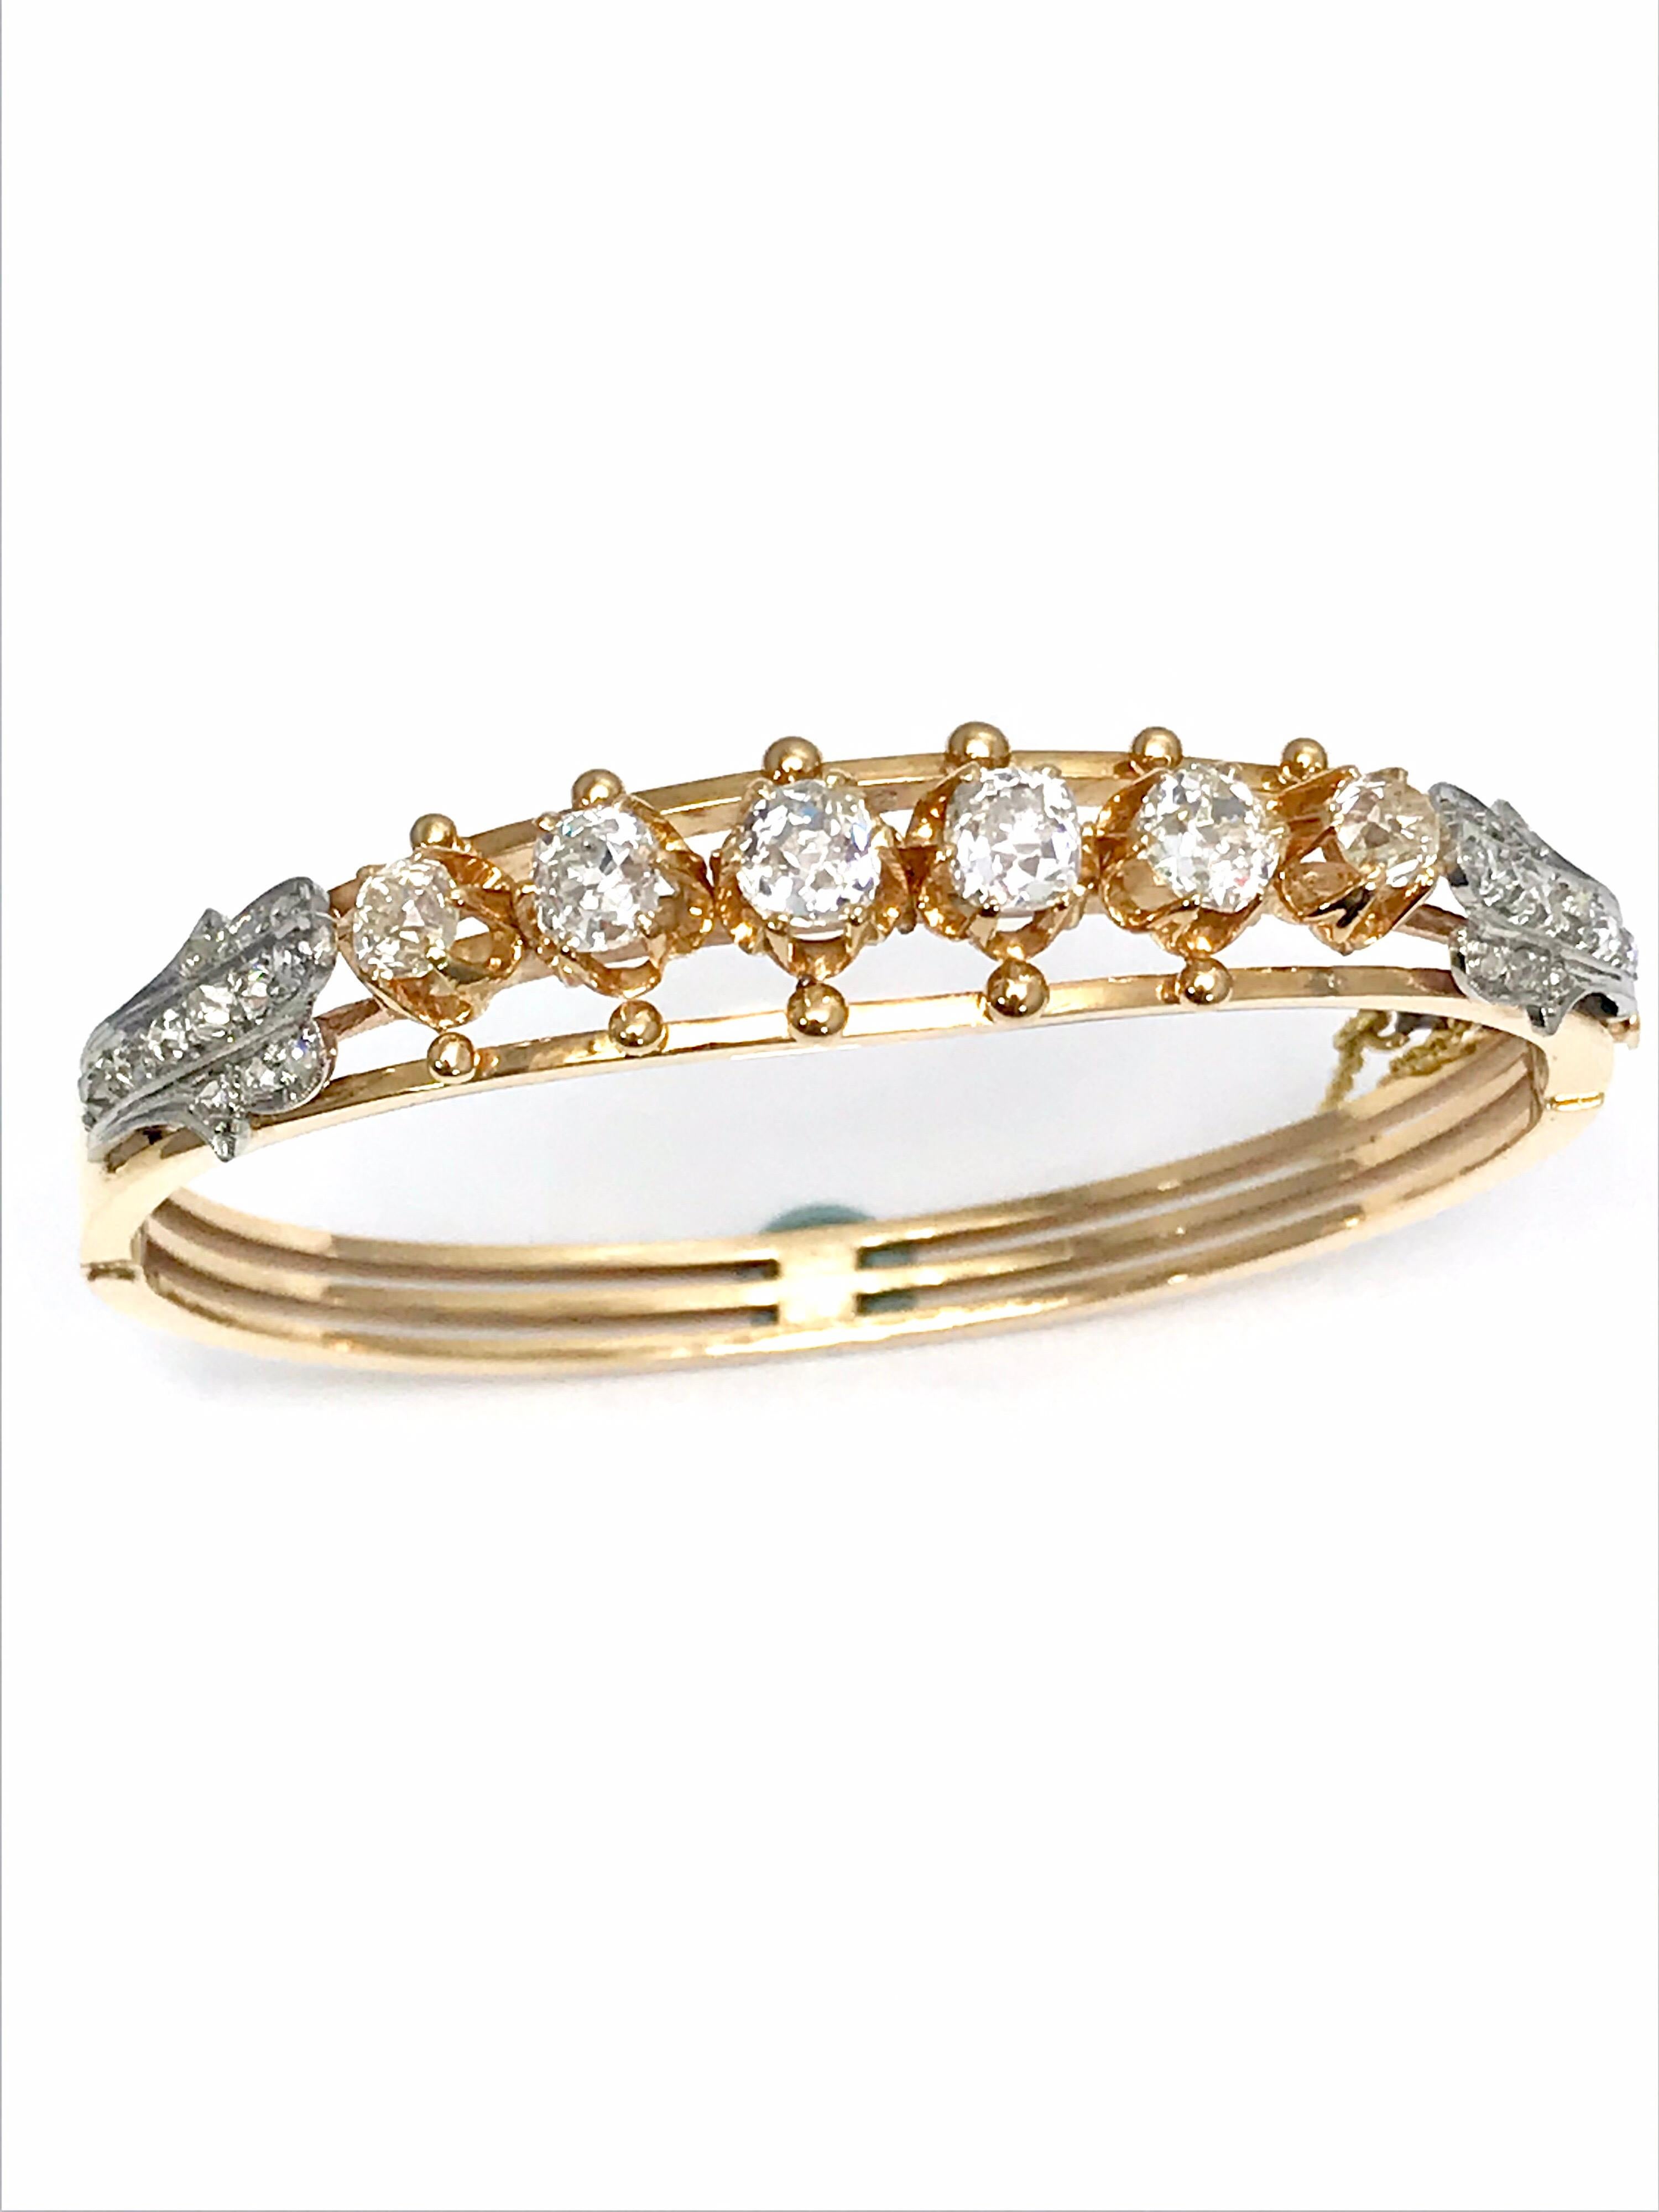 An absolutely gorgeous Victorian old mine cut and rose cut Diamond 18 karat rose gold bangle bracelet. There are six old mine cut Diamonds prong set in the center of the bracelet, totaling 3.00 carats, with rose cut Diamonds set in platinum to each